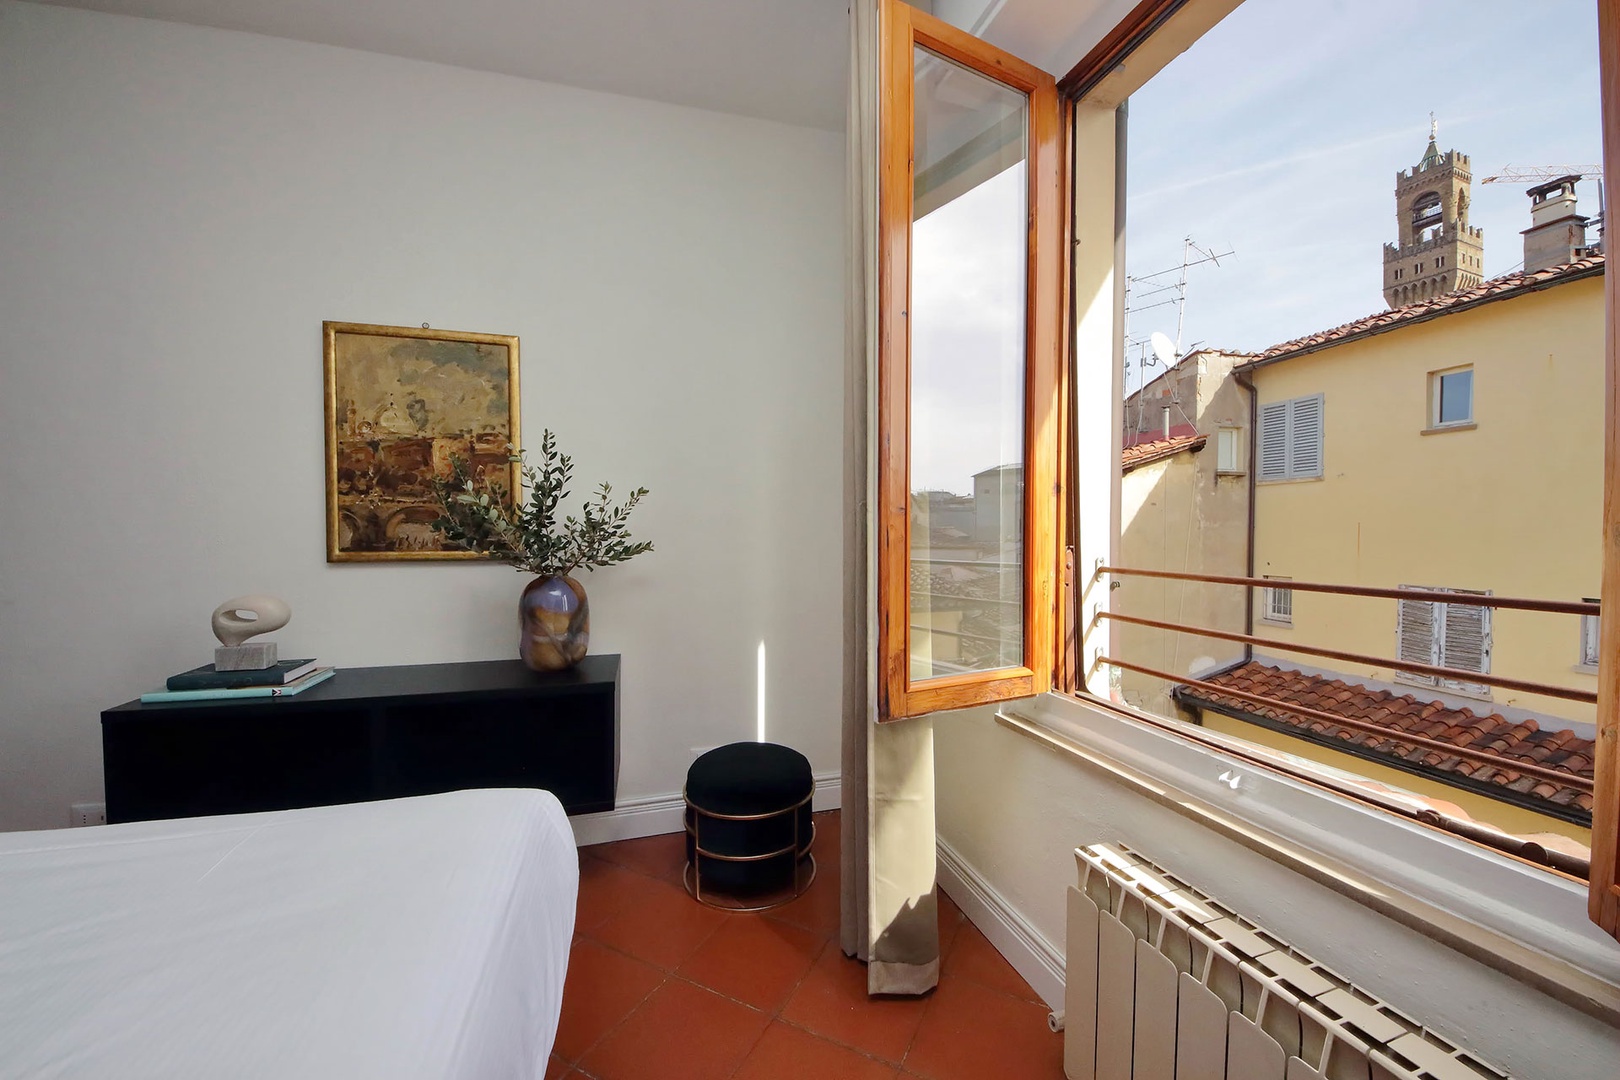 Wake up to the view of Palazzo della Signora bell tower from the bedroom.